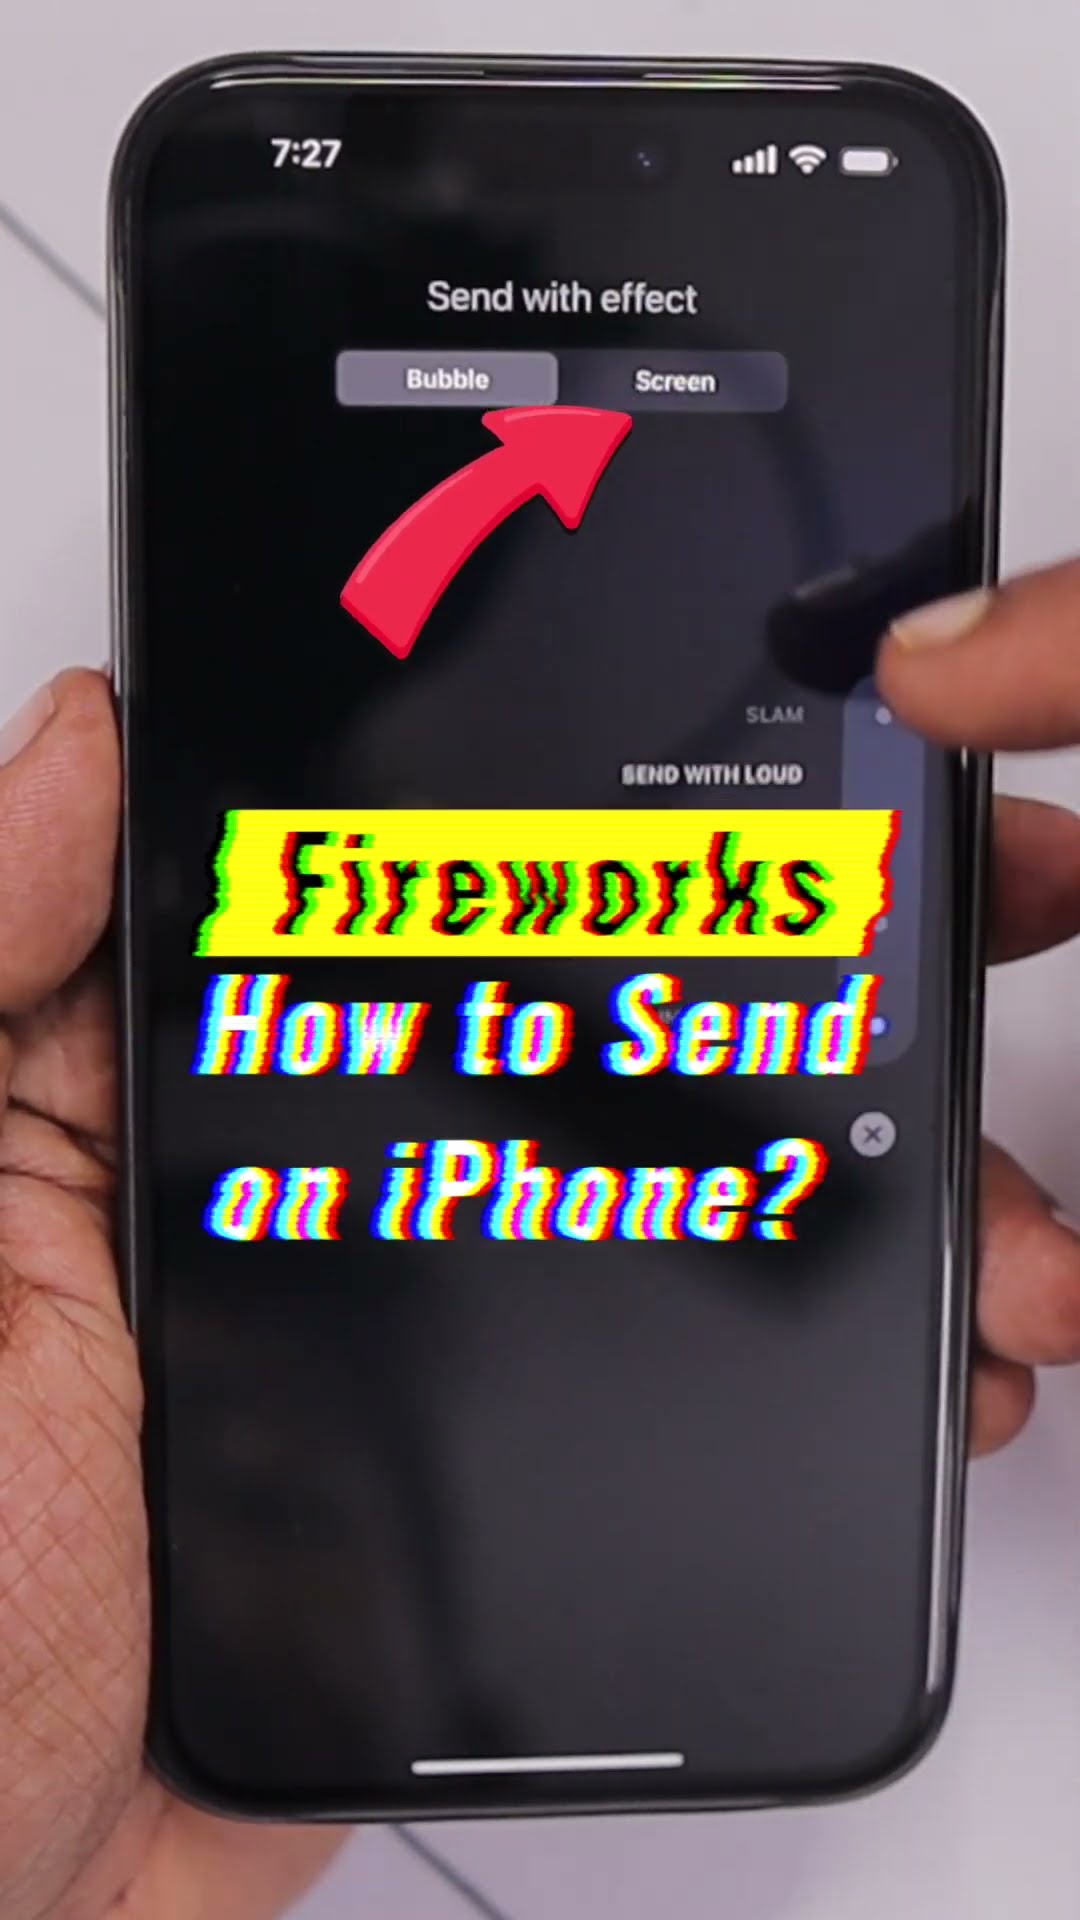 How to Send FIREWORKS  on iPhone Text Message?